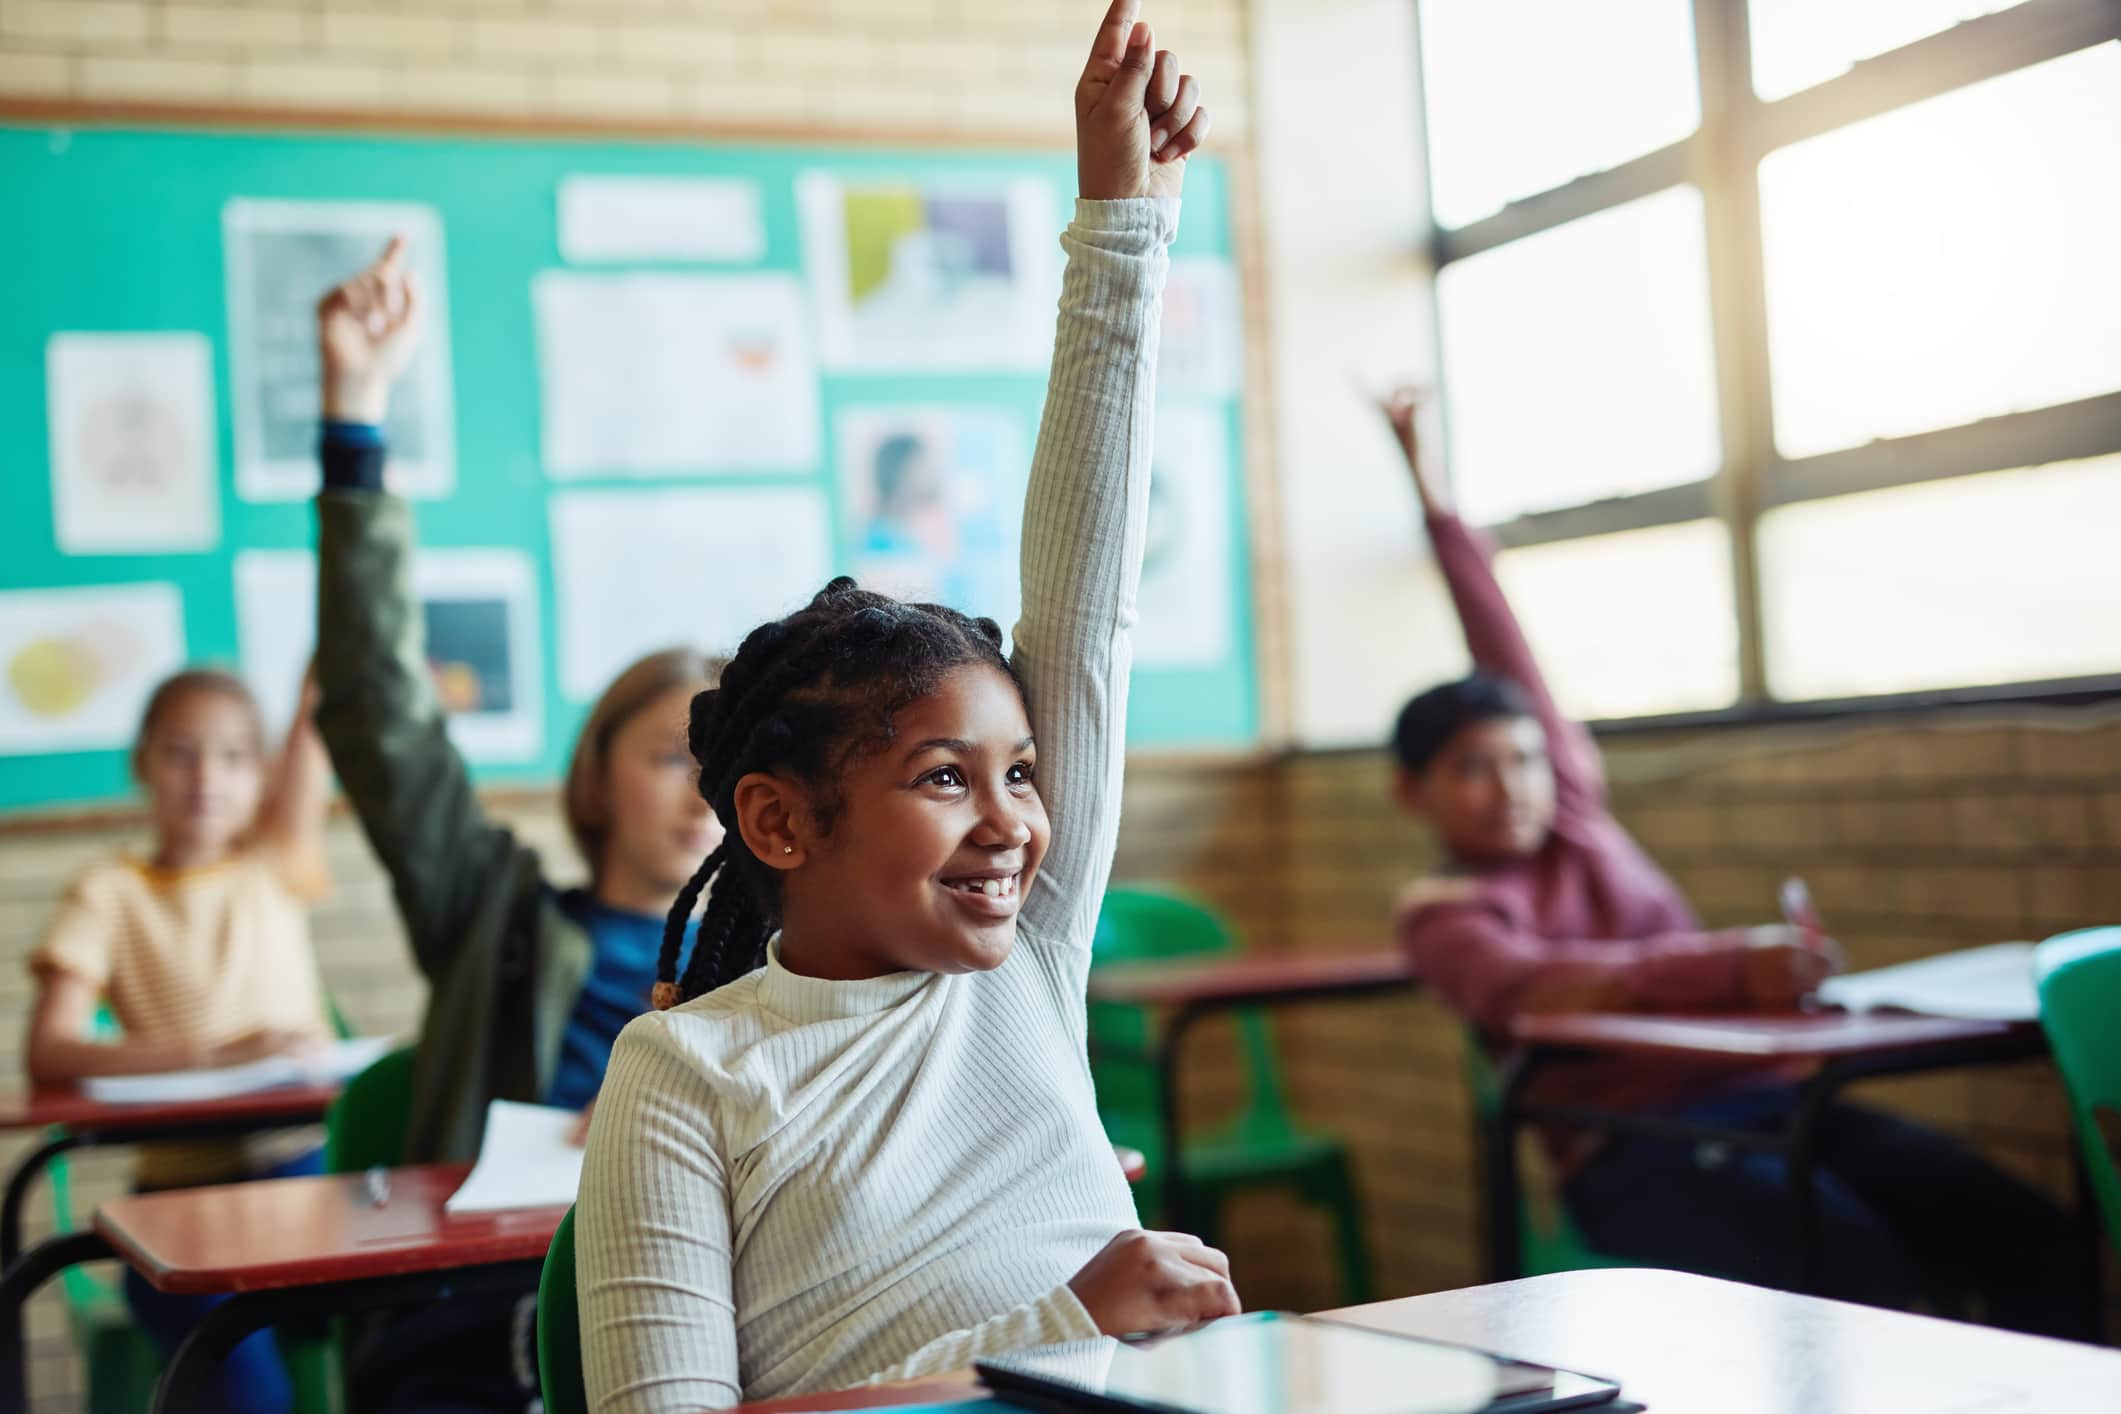 Shot of young children raising their hands in a classroom